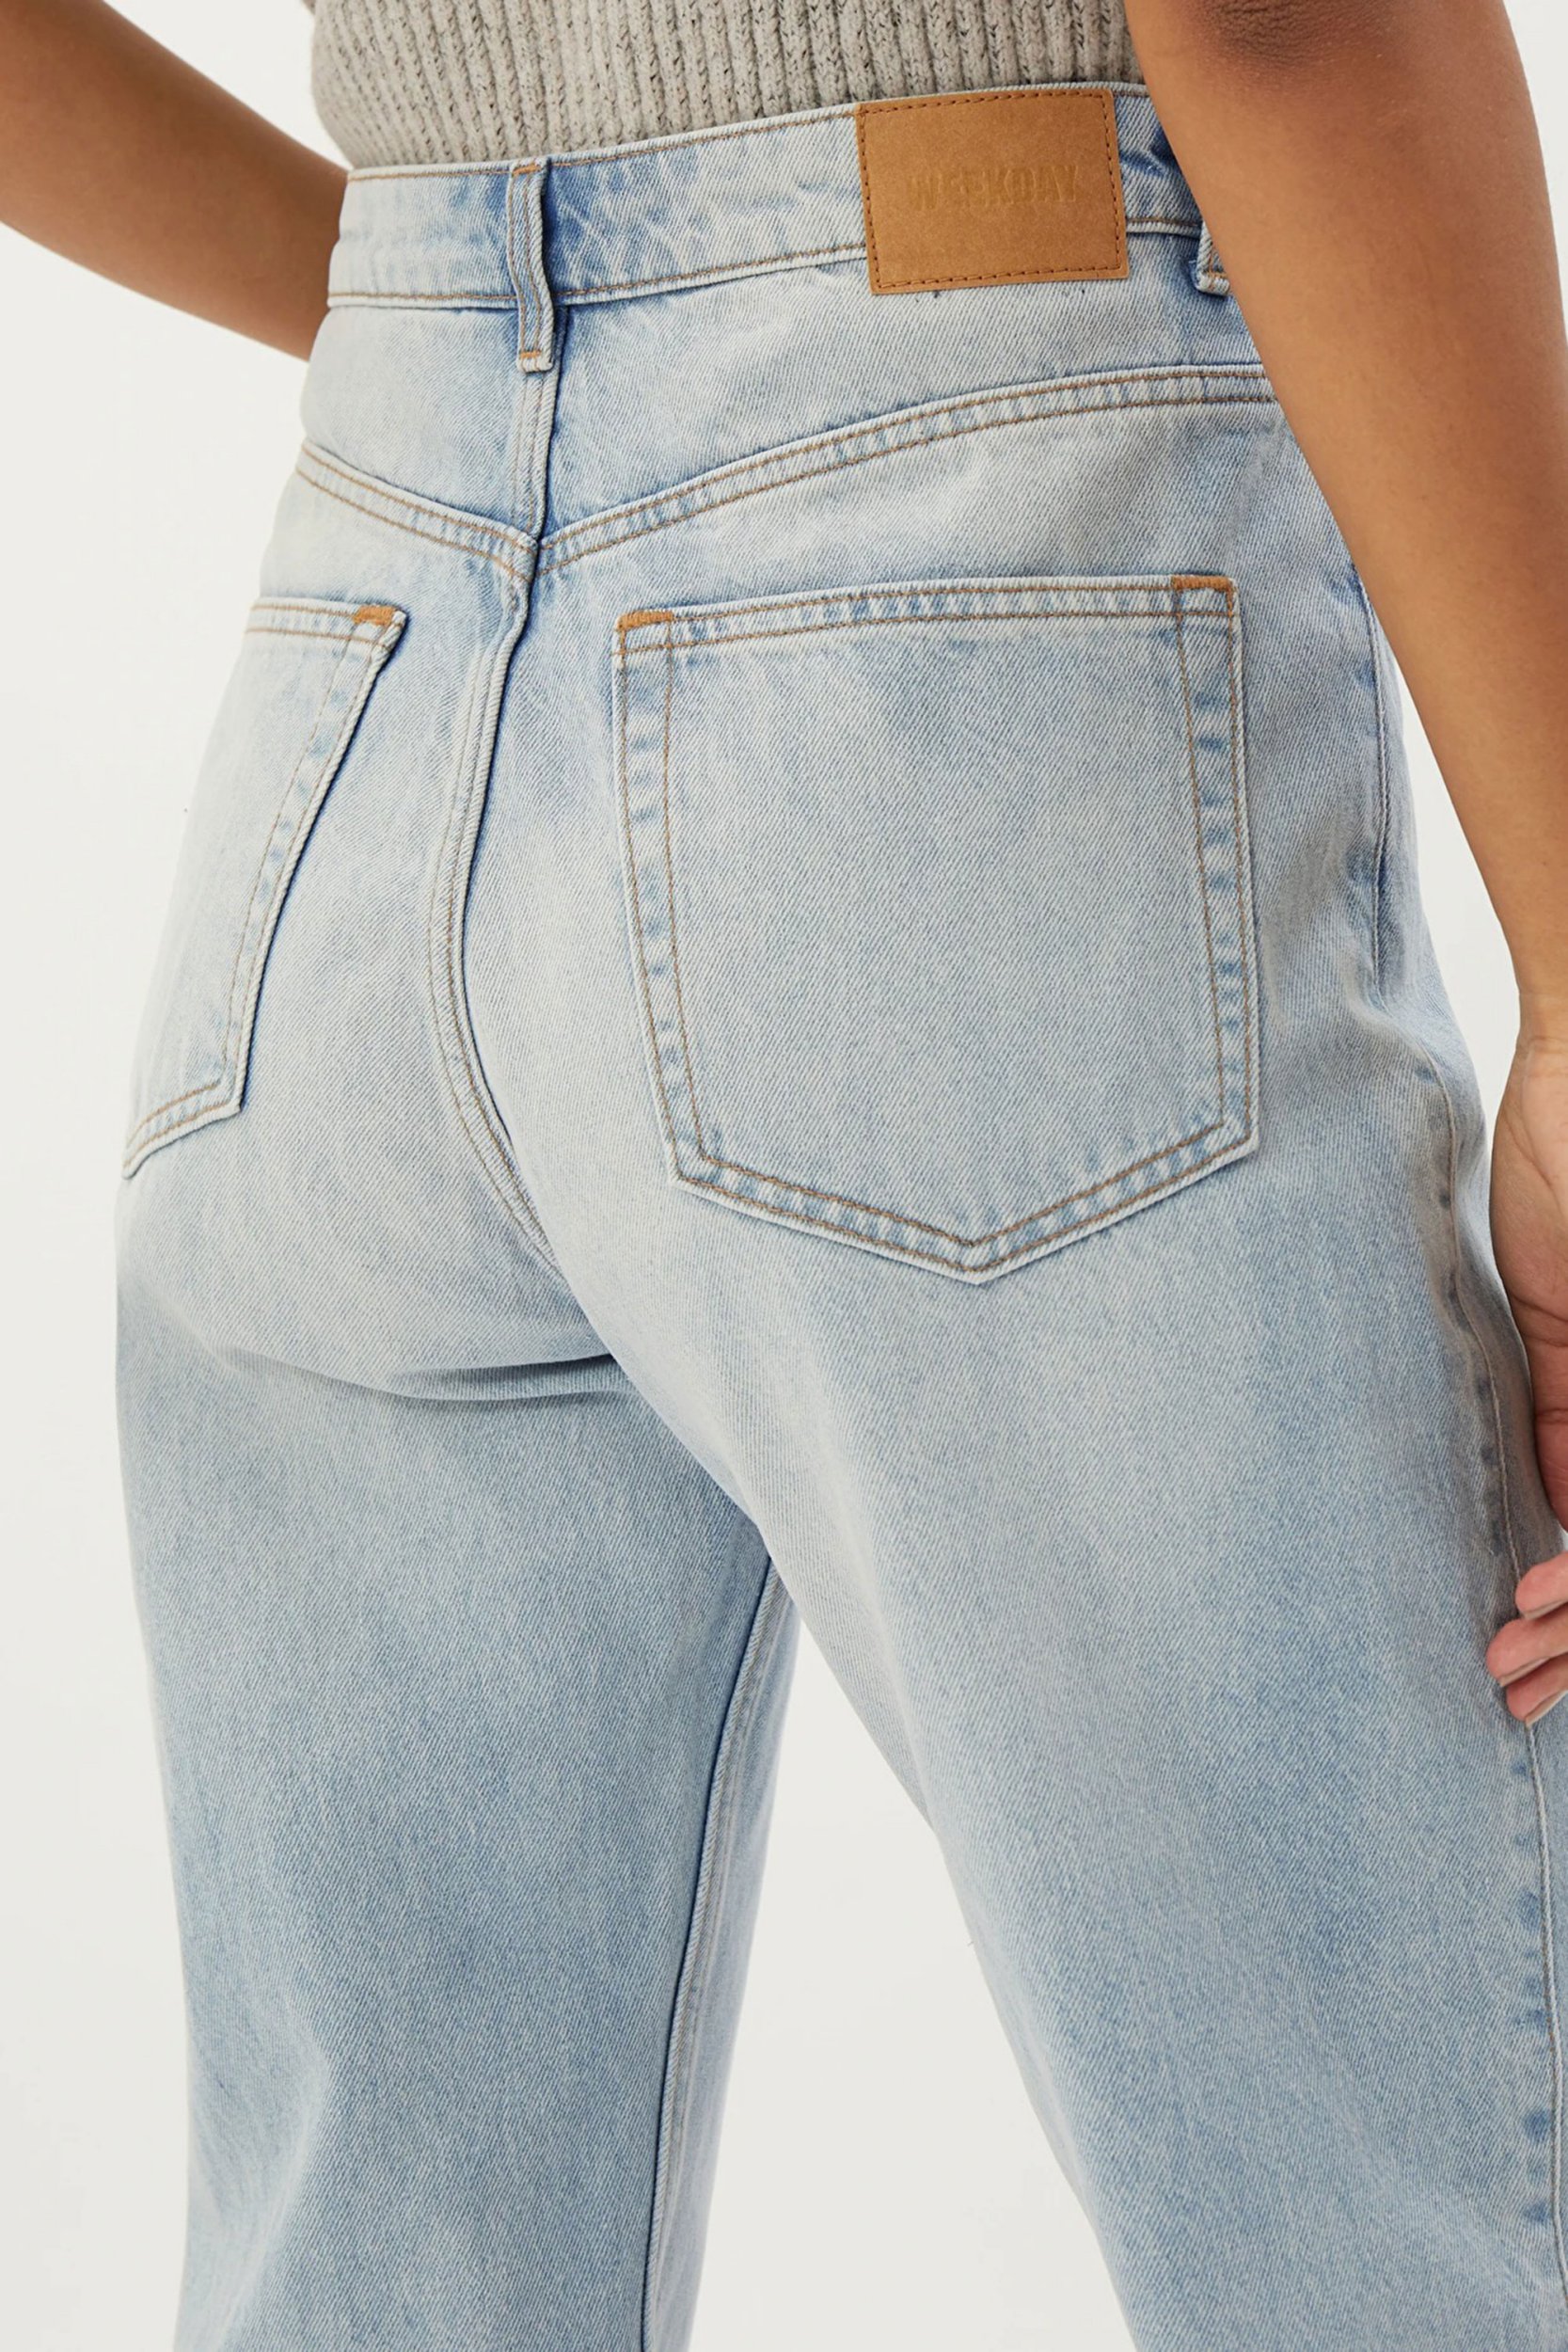 Weekday Jeans Review: Are These The Best Jeans On The High Street?